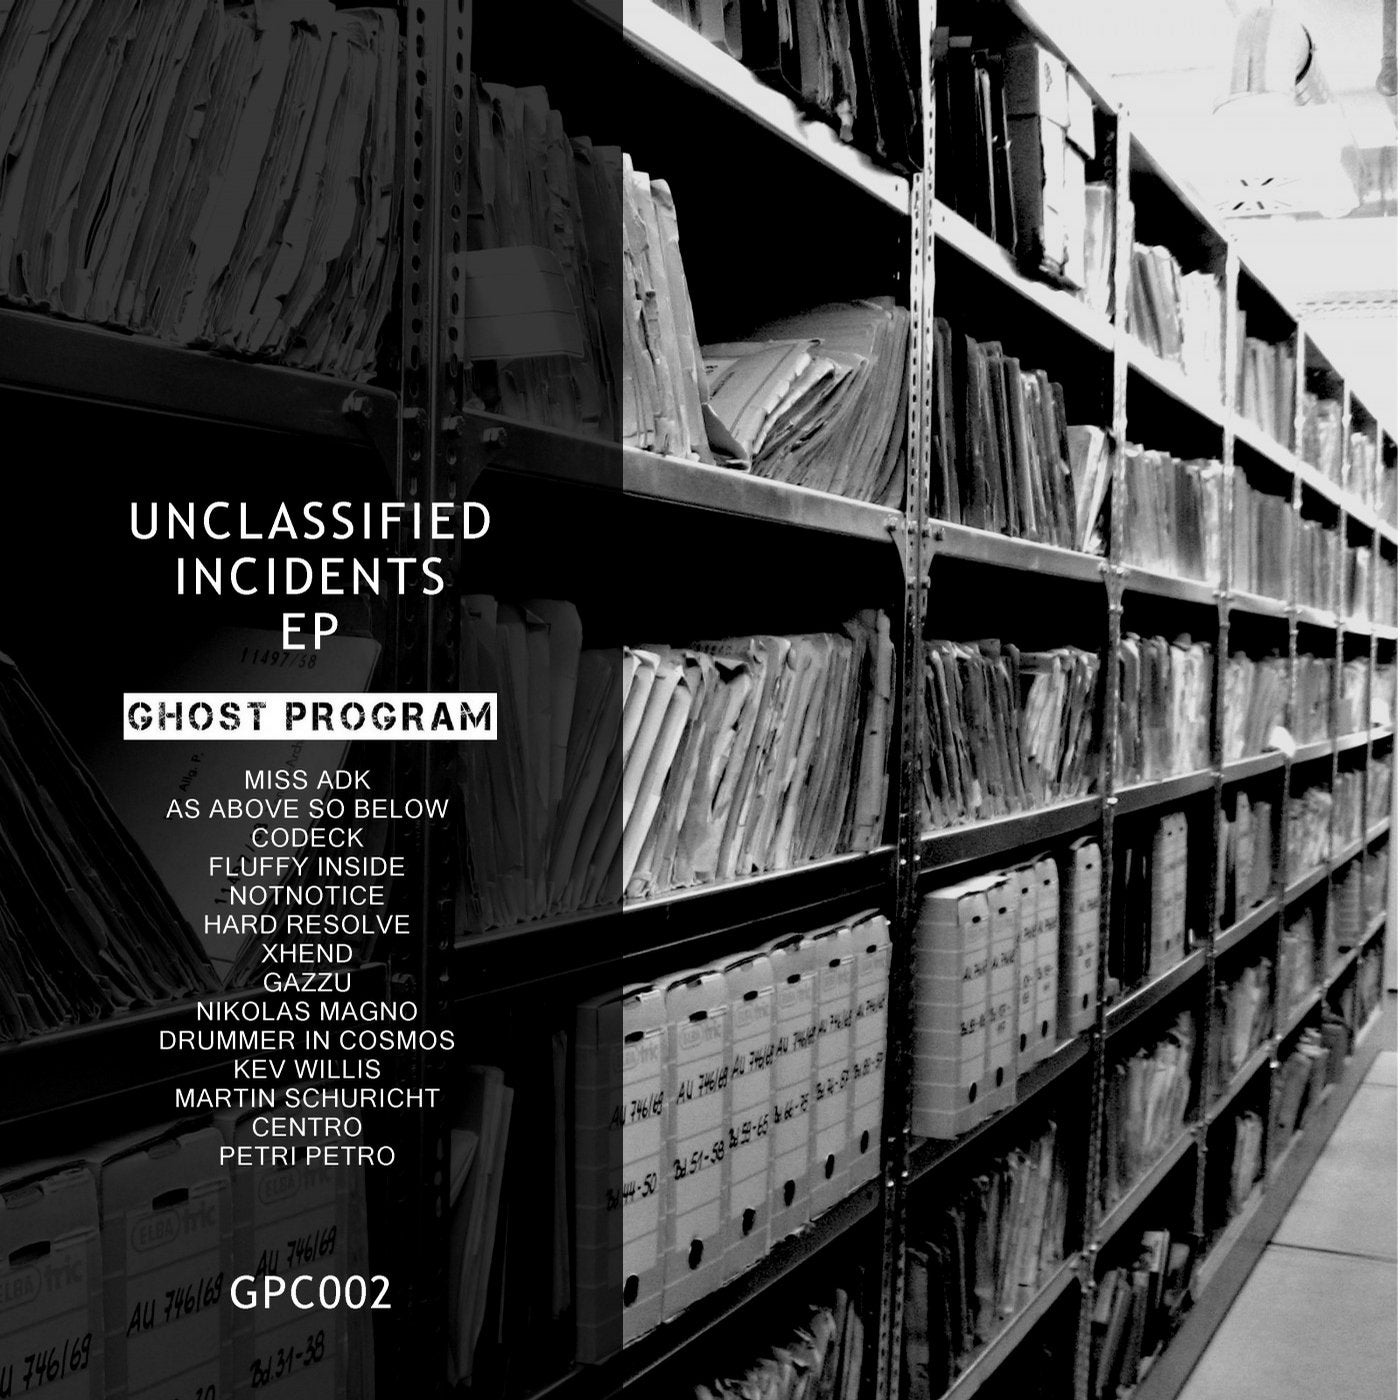 Unclassified Incidents EP